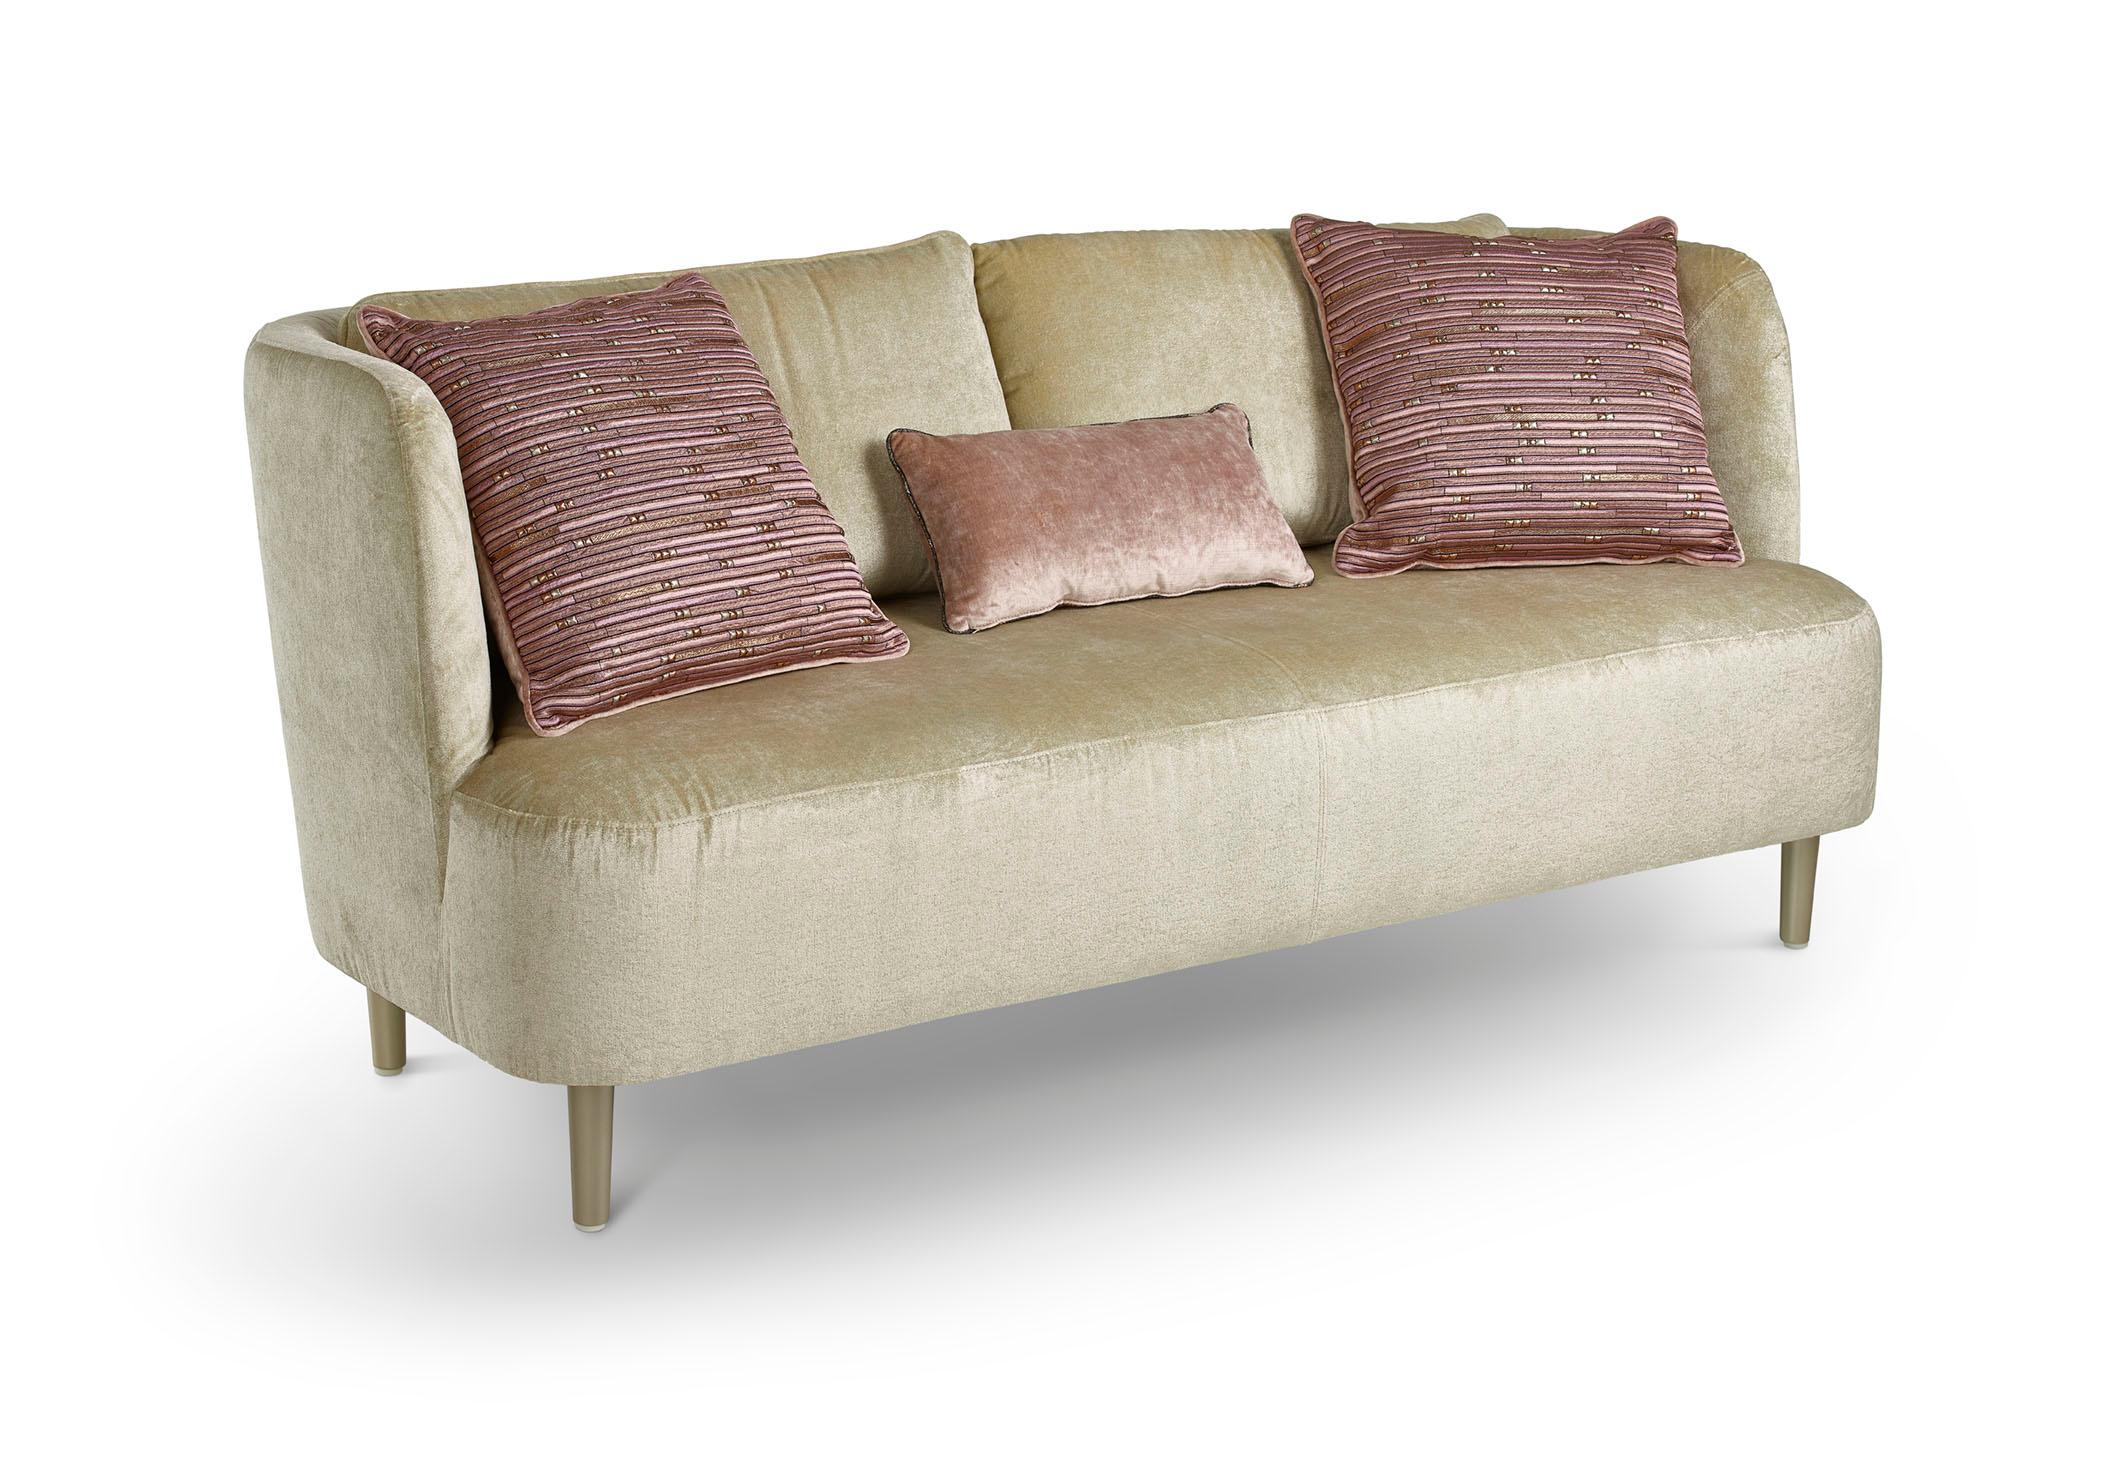 Modern Stylish Sofa Frame Made of wood Distressed Paint Feet customizable For Sale